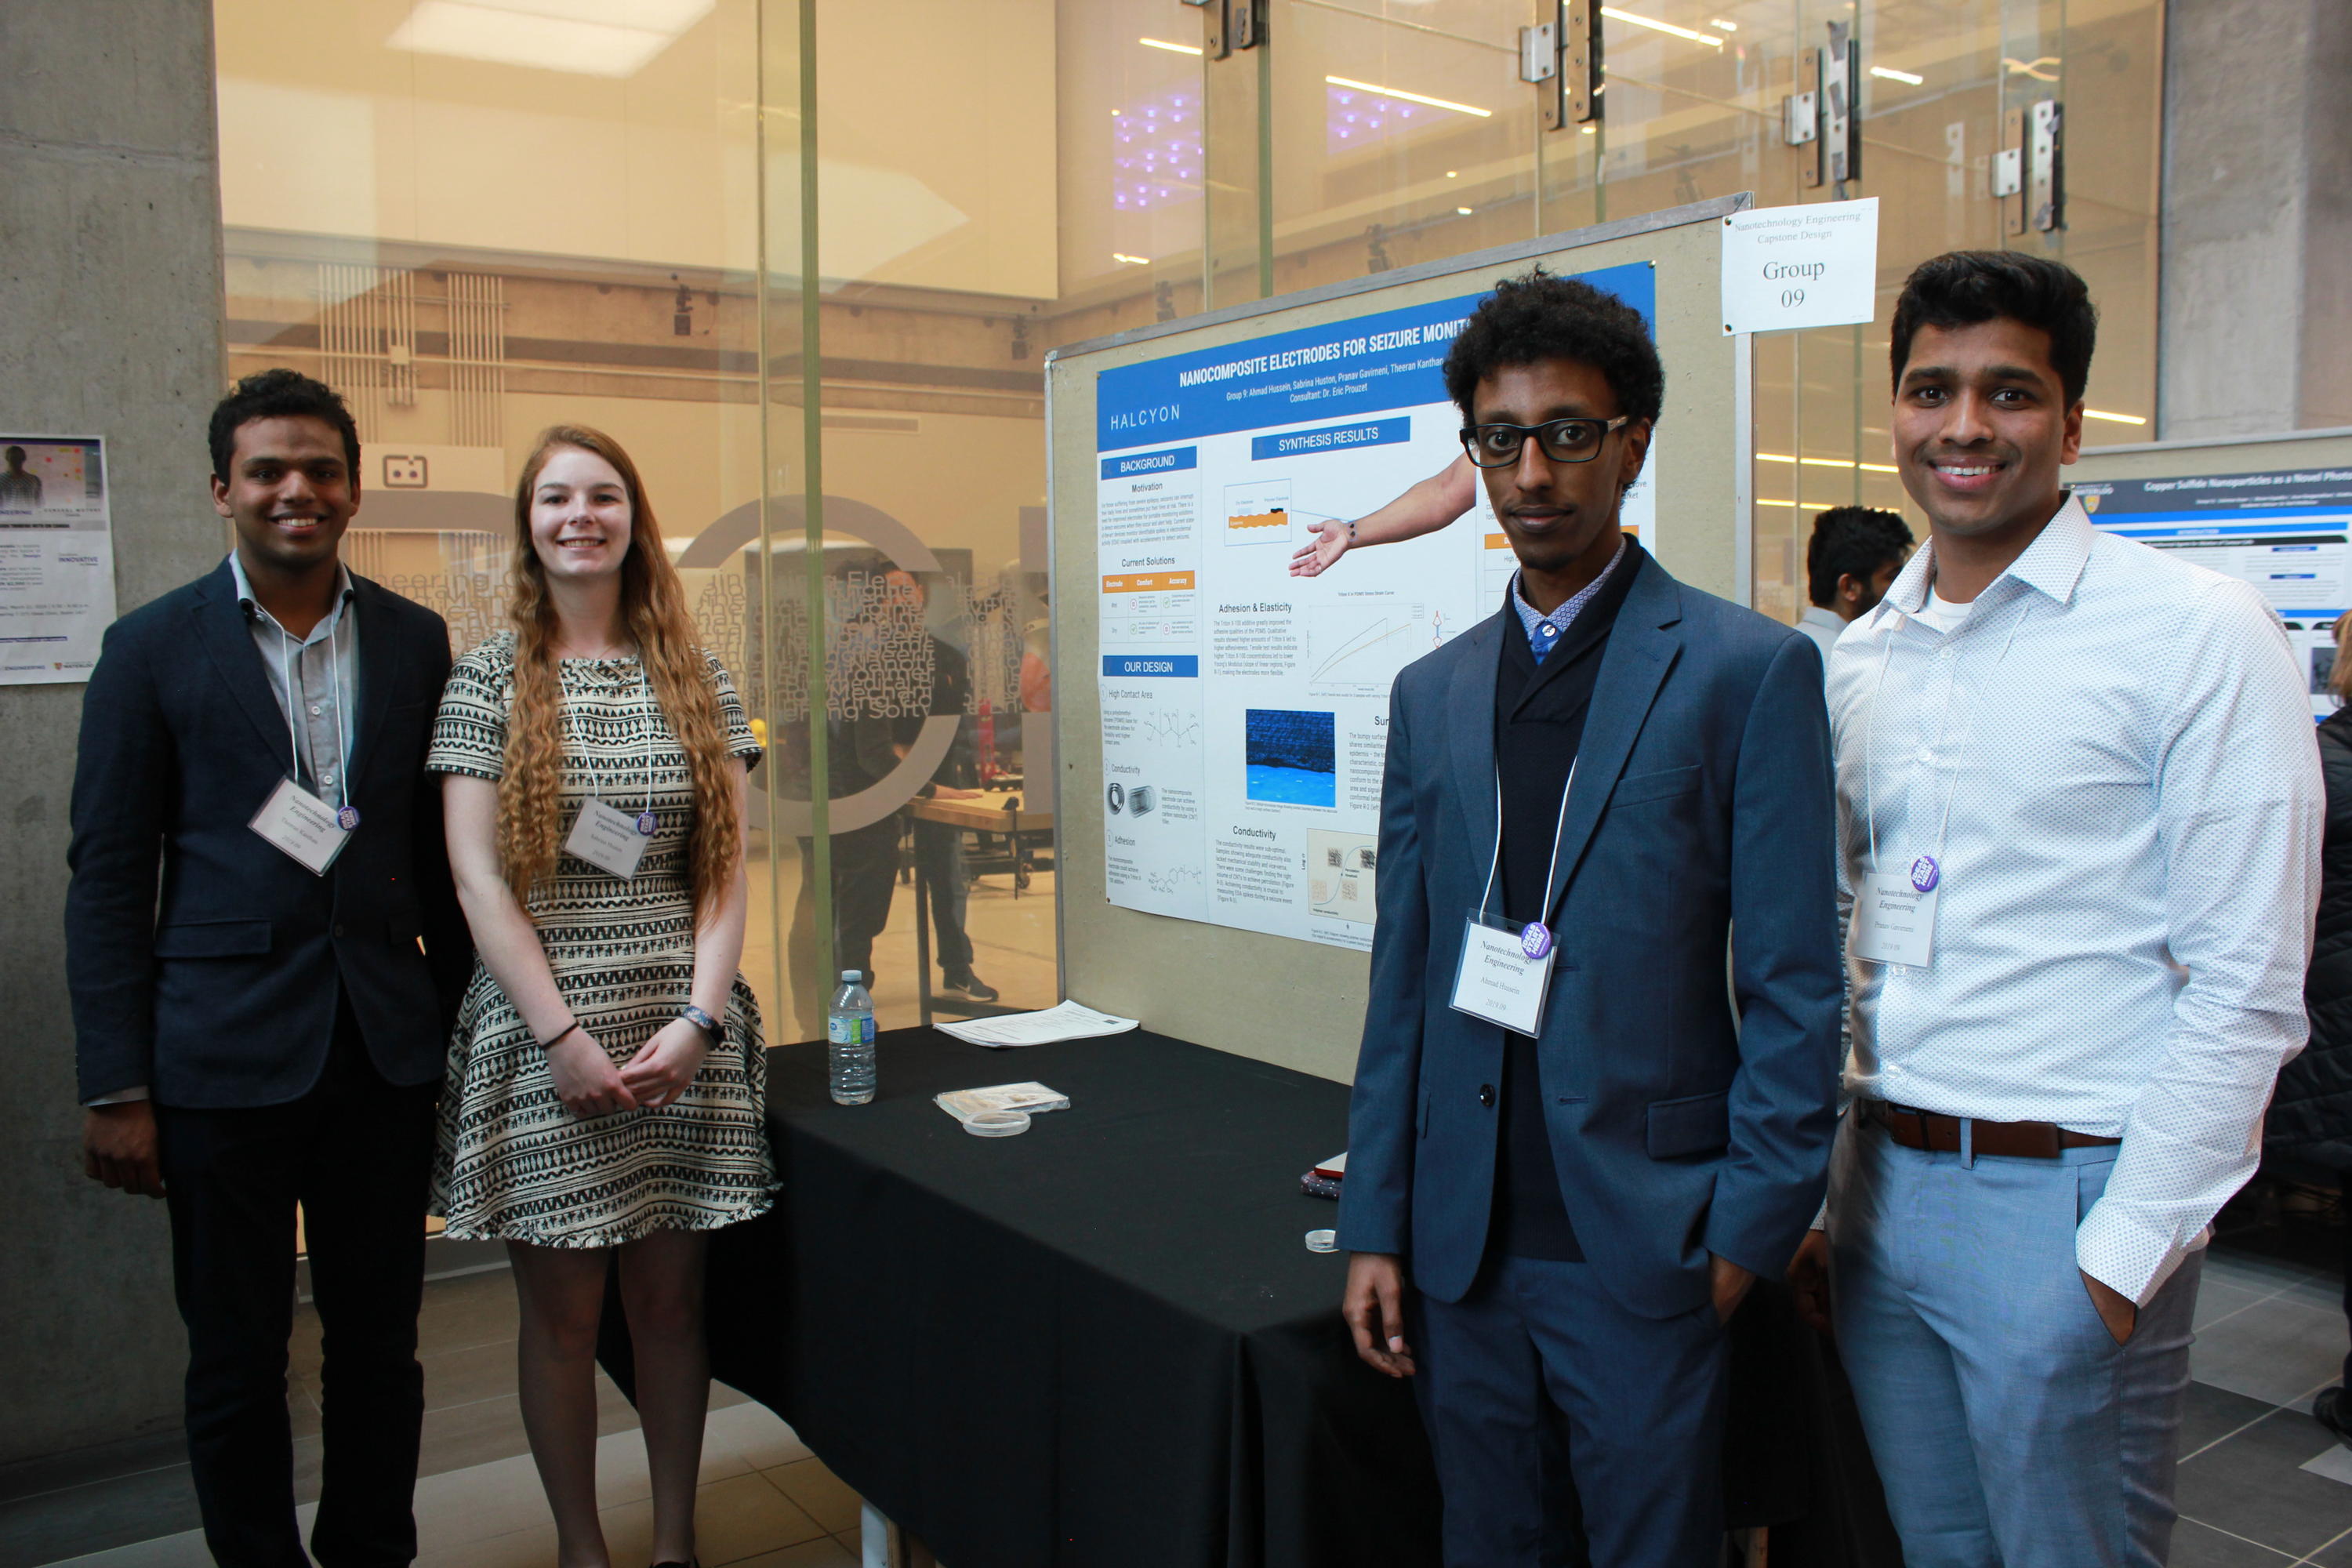 Team 9 students with their project poster at the 2019 Capstone Design Symposium.